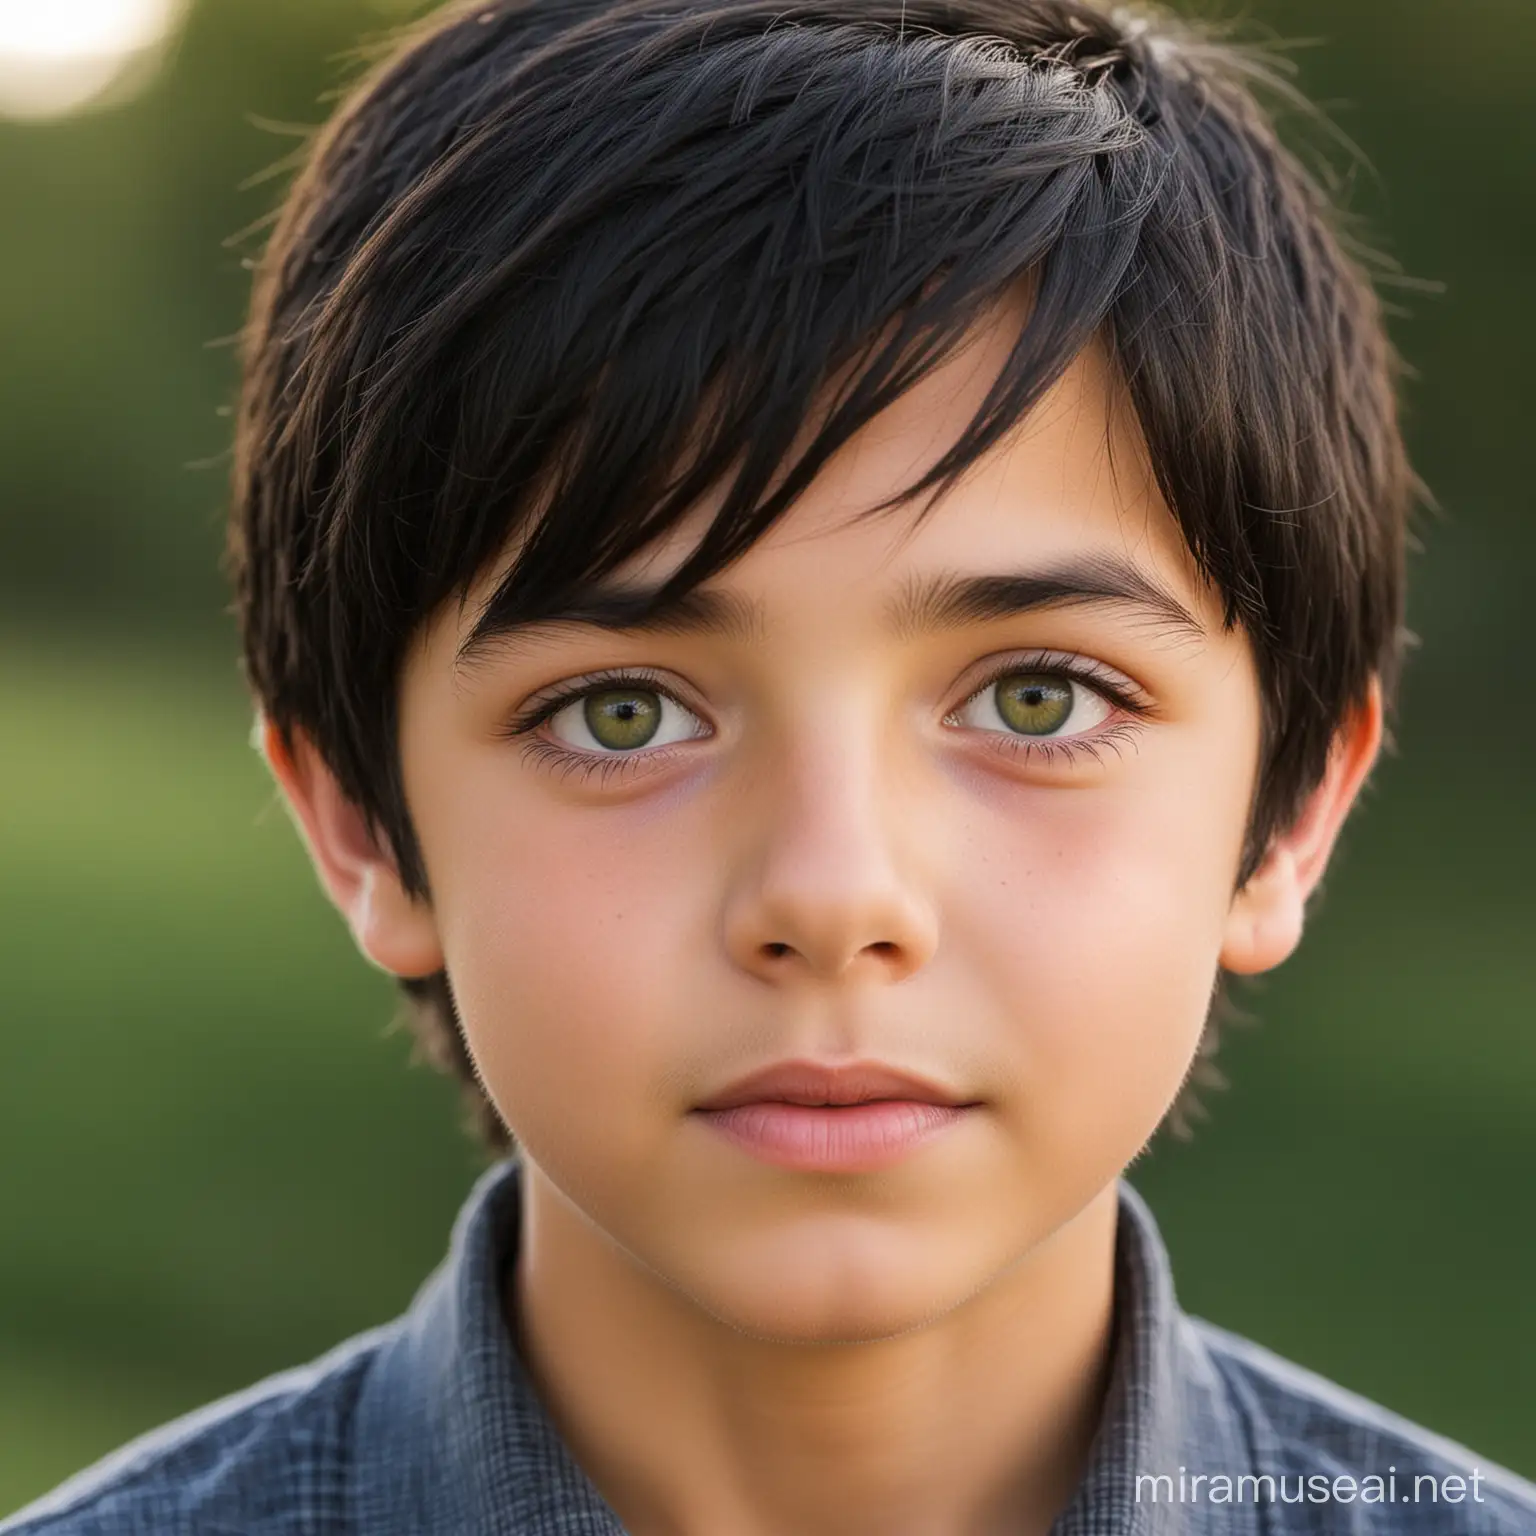 Vibrant Olive Skinned Preteen Boy with Bright Eyes and Coarse Black Hair Portrait